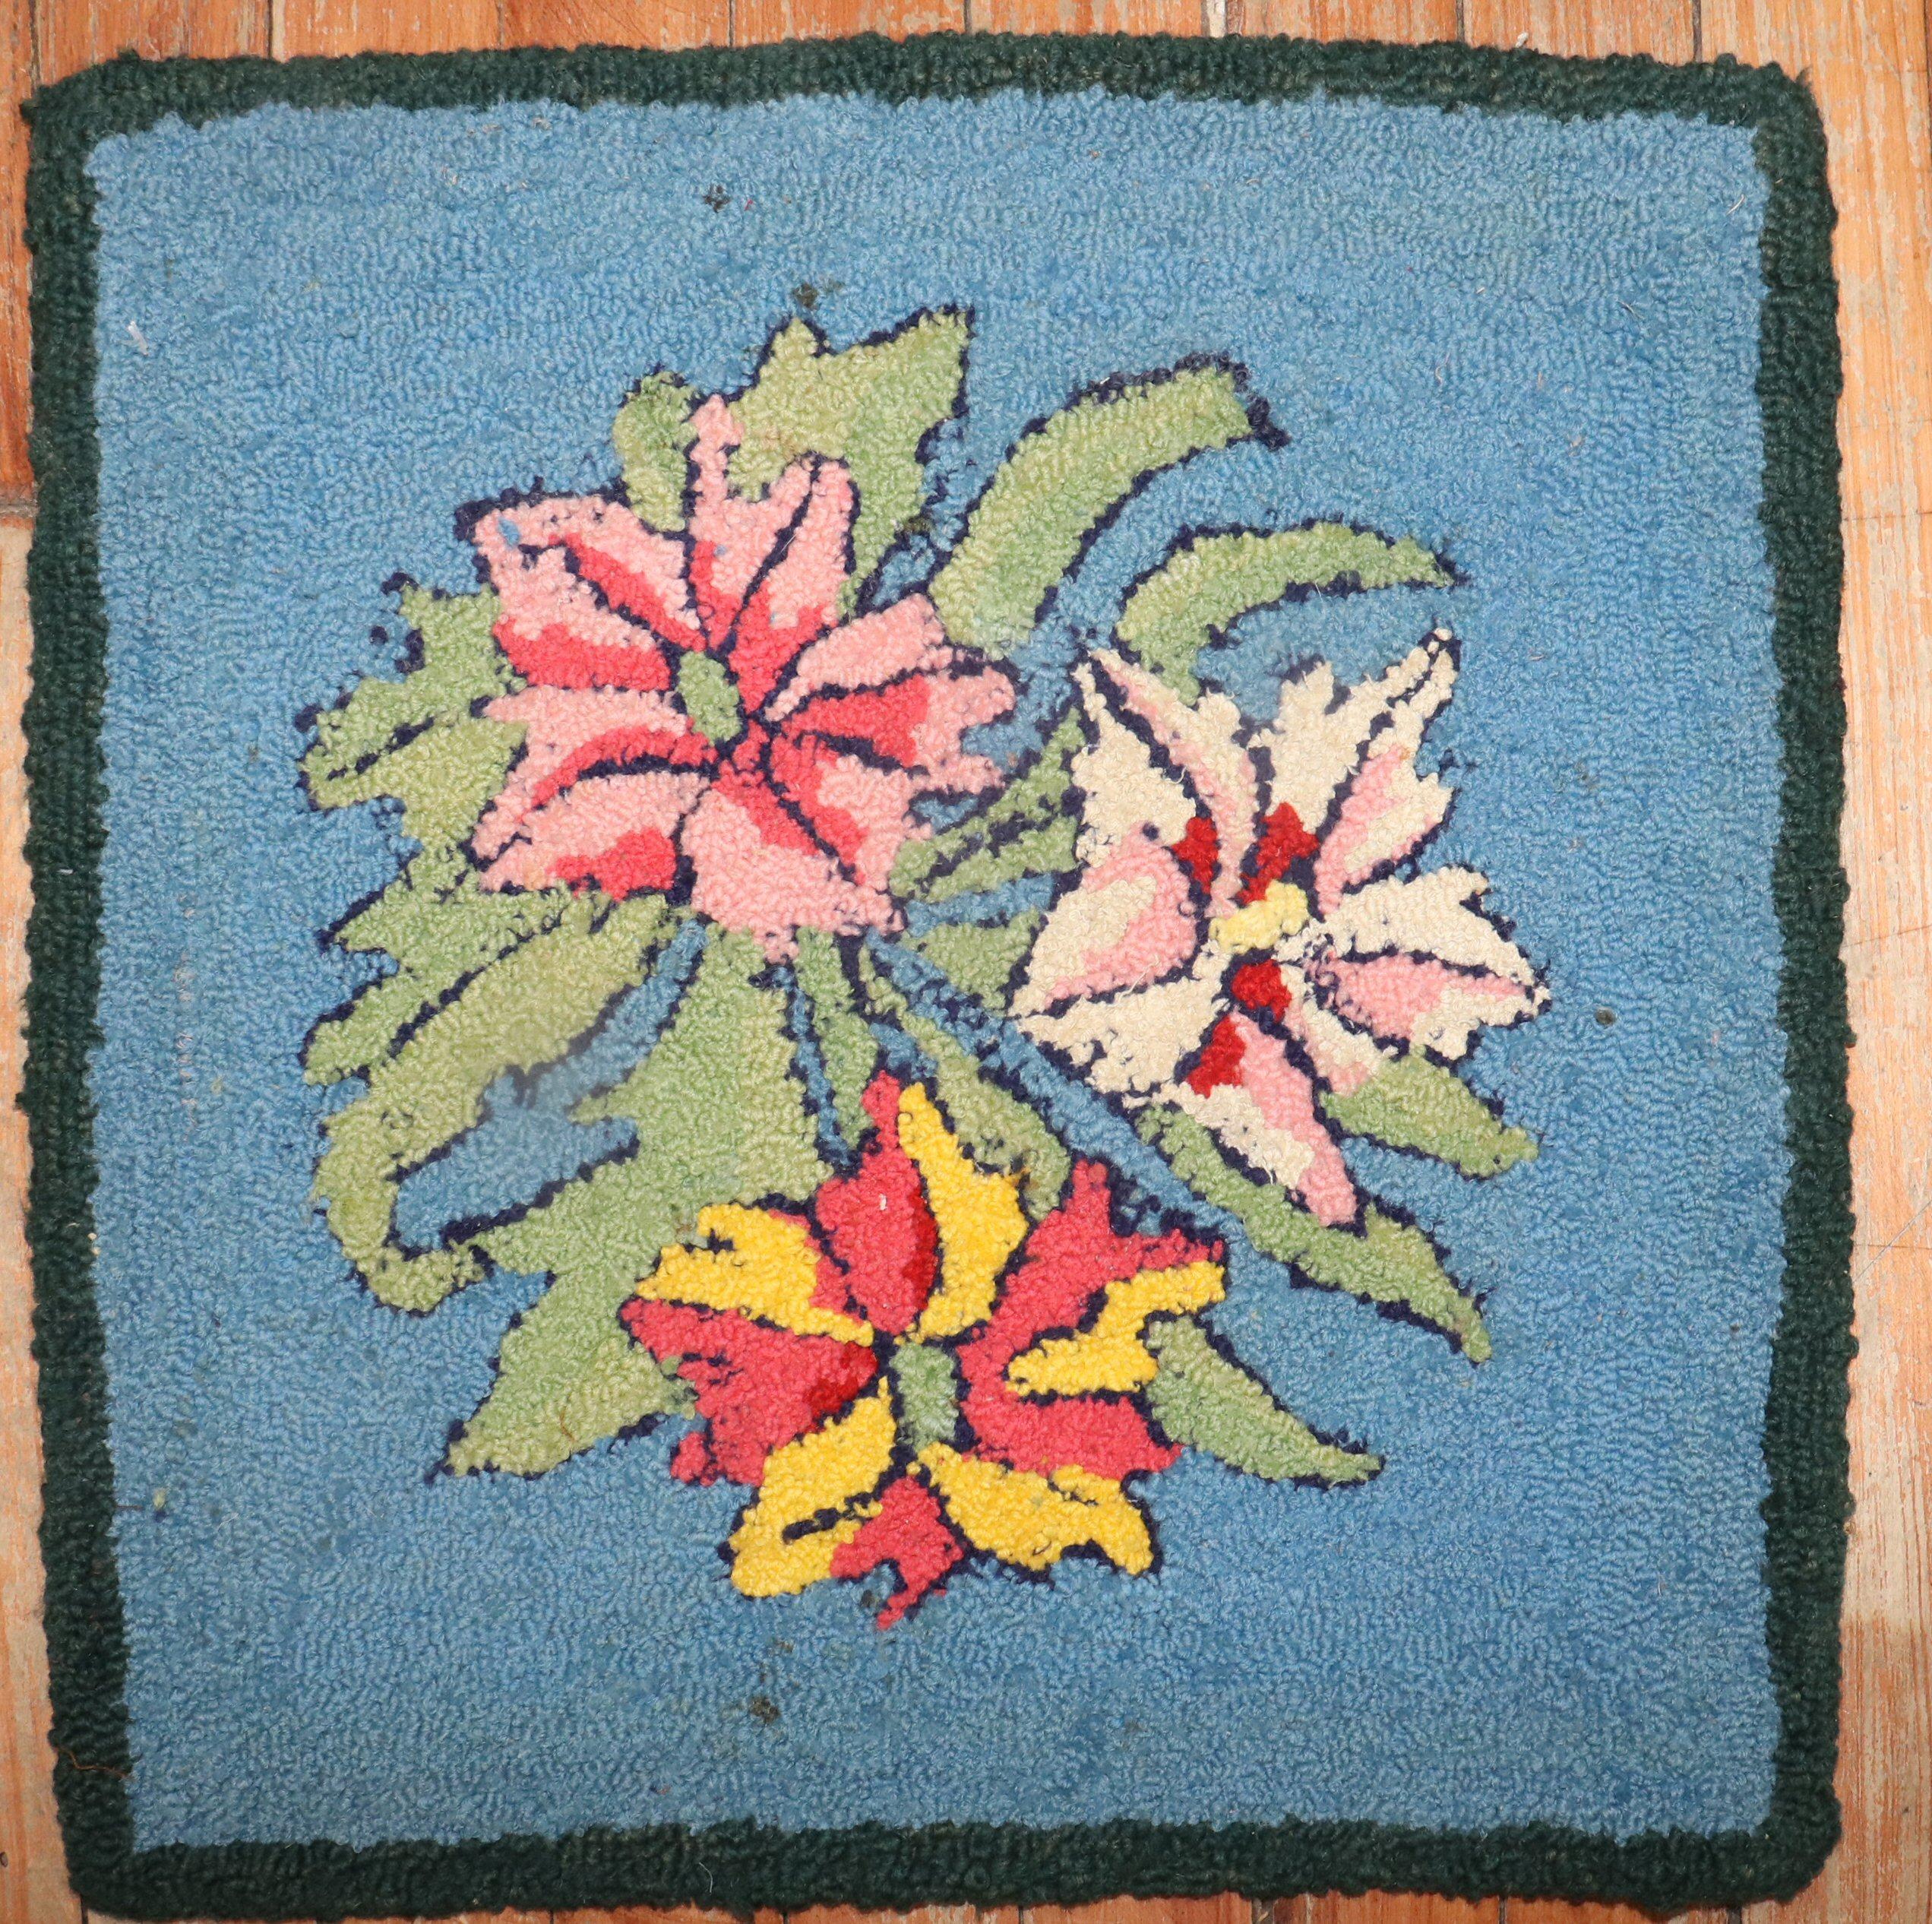 One-of-a-kind American Hooked rug with a floral pattern on a sky blue field.

Measures: 1'5'' x 1'5''.